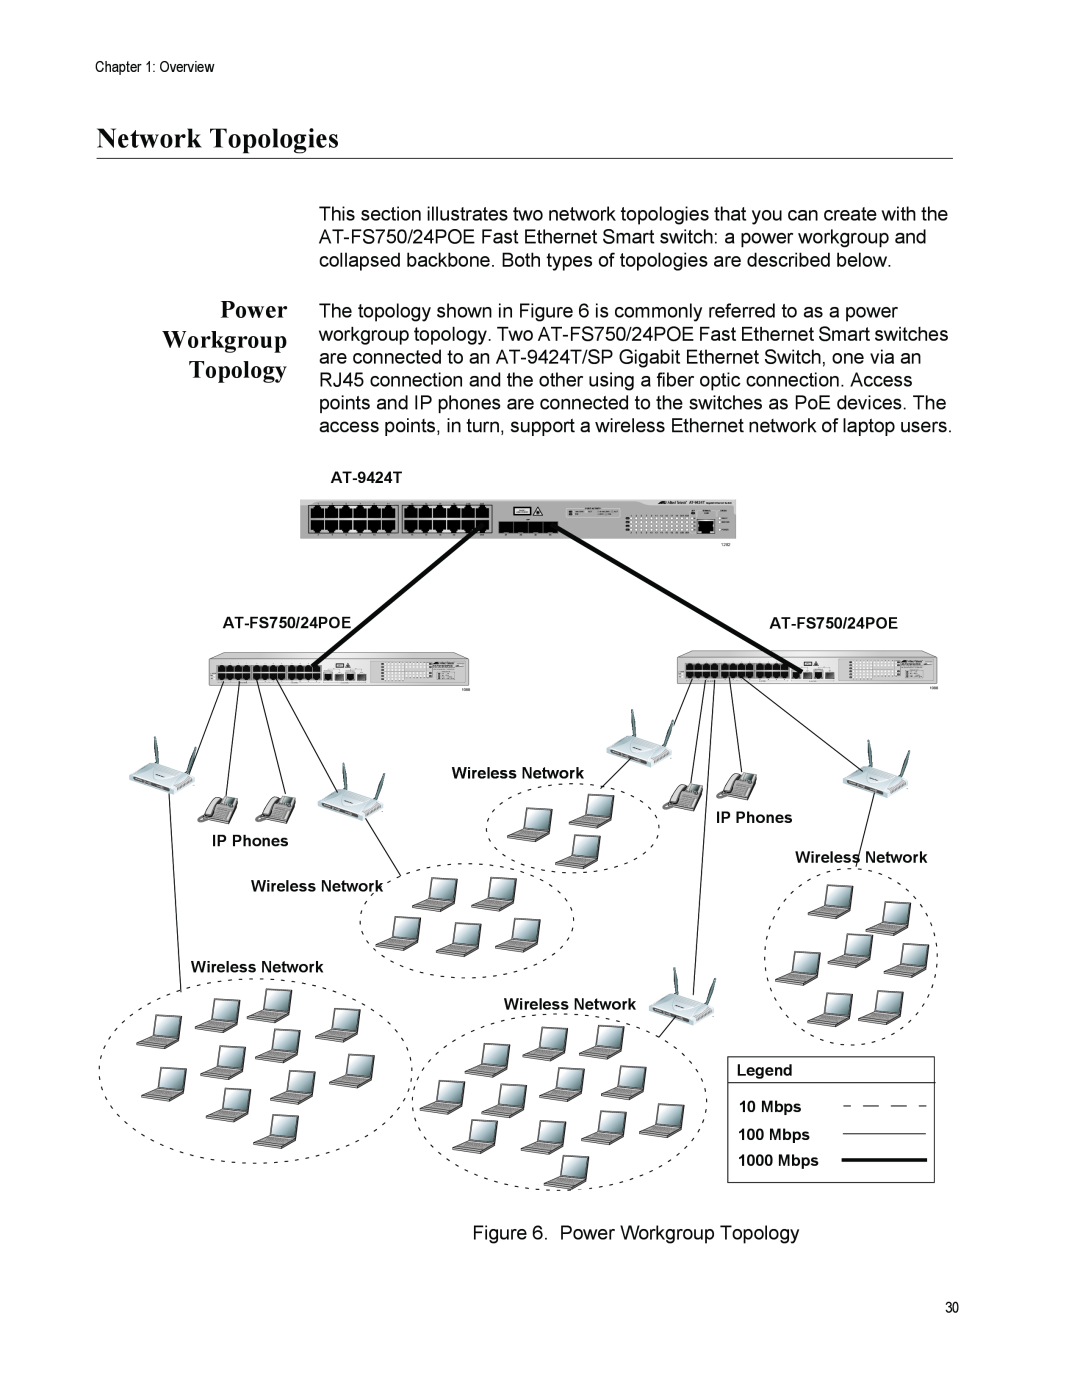 Allied Telesis AT-FS750/24POE manual Network Topologies, Power Workgroup Topology 